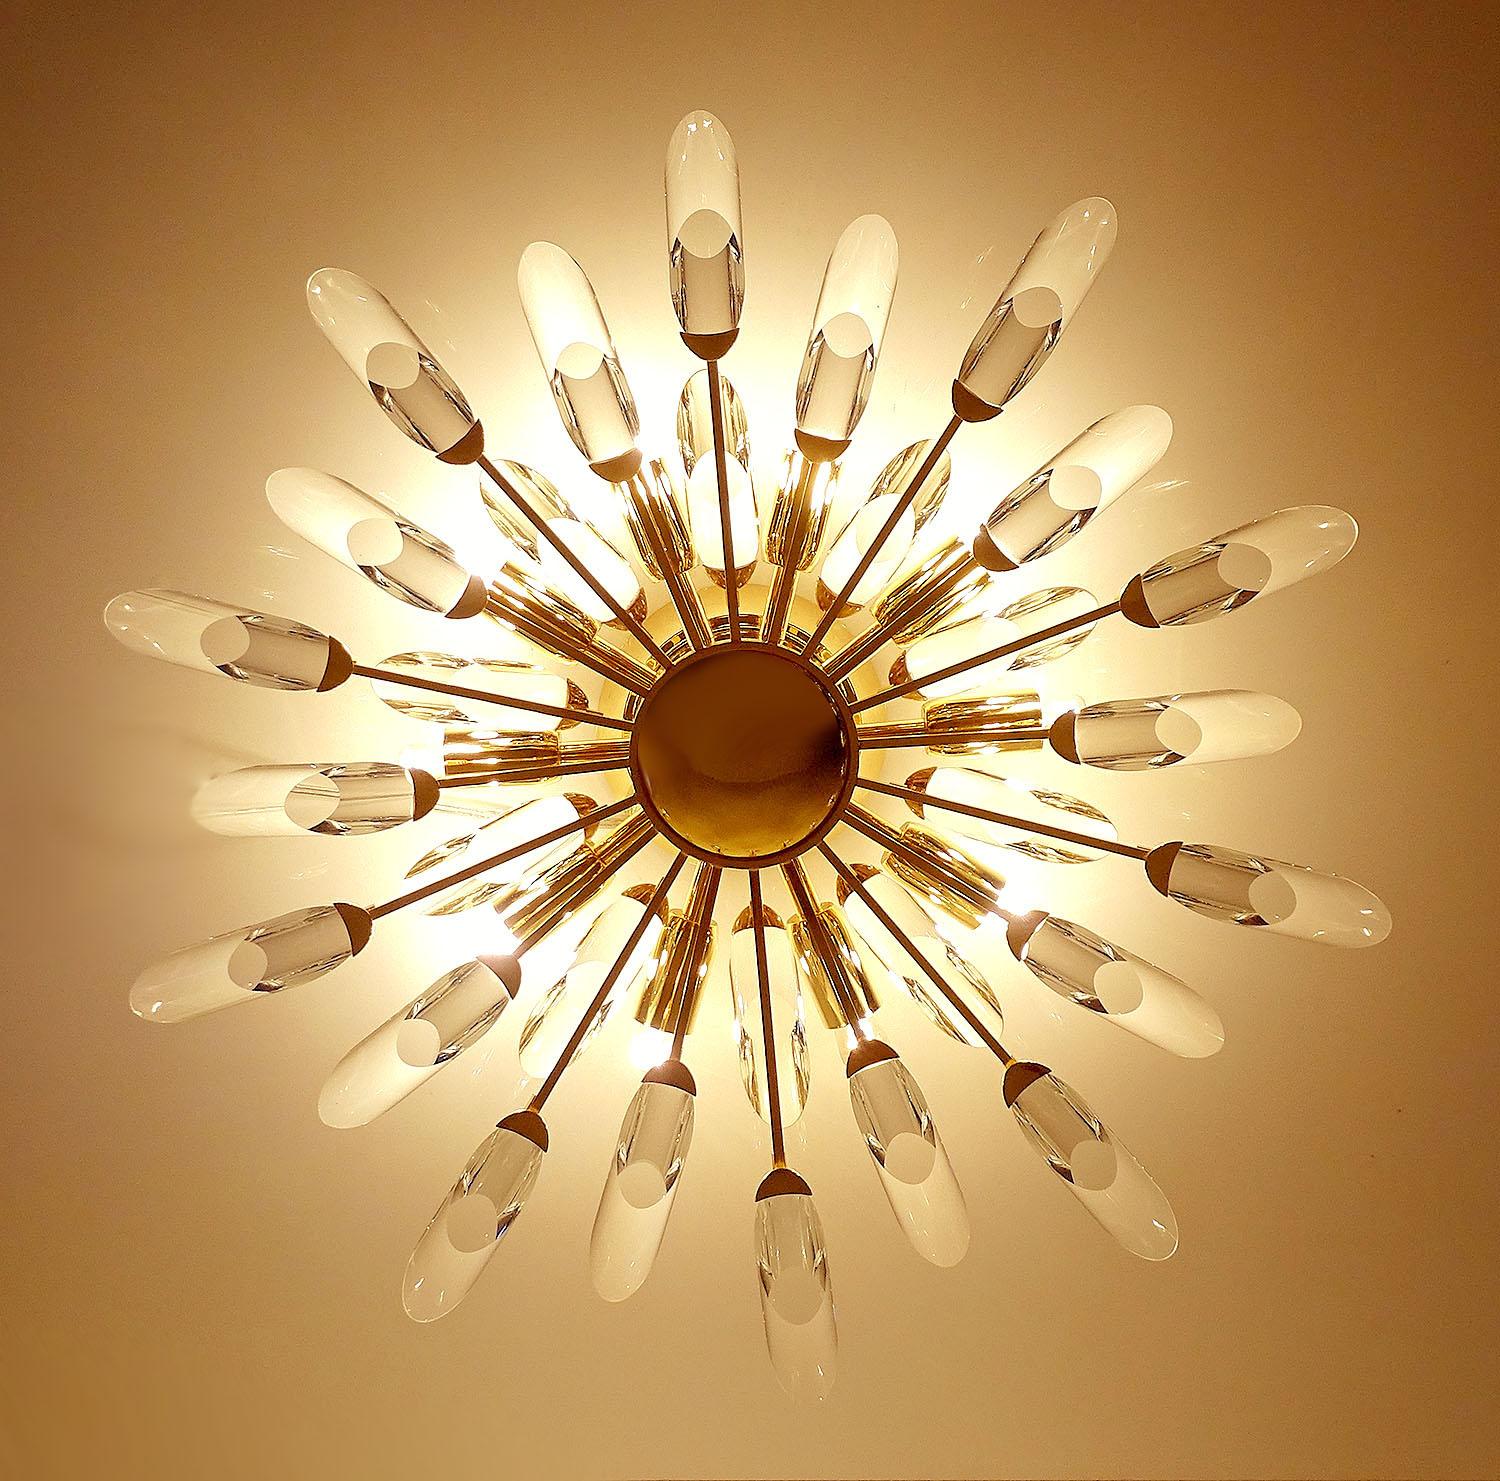 Stunning large Italian Stilkronen gilded brass ceiling flush mount light featuring a sunburst array of branches holding elongated crystal with chamfered ends - comes with ceiling attachment bar.
Dimensions:
H 5.12 in. x Dm 24.02 in.
H 13 cm x Dm